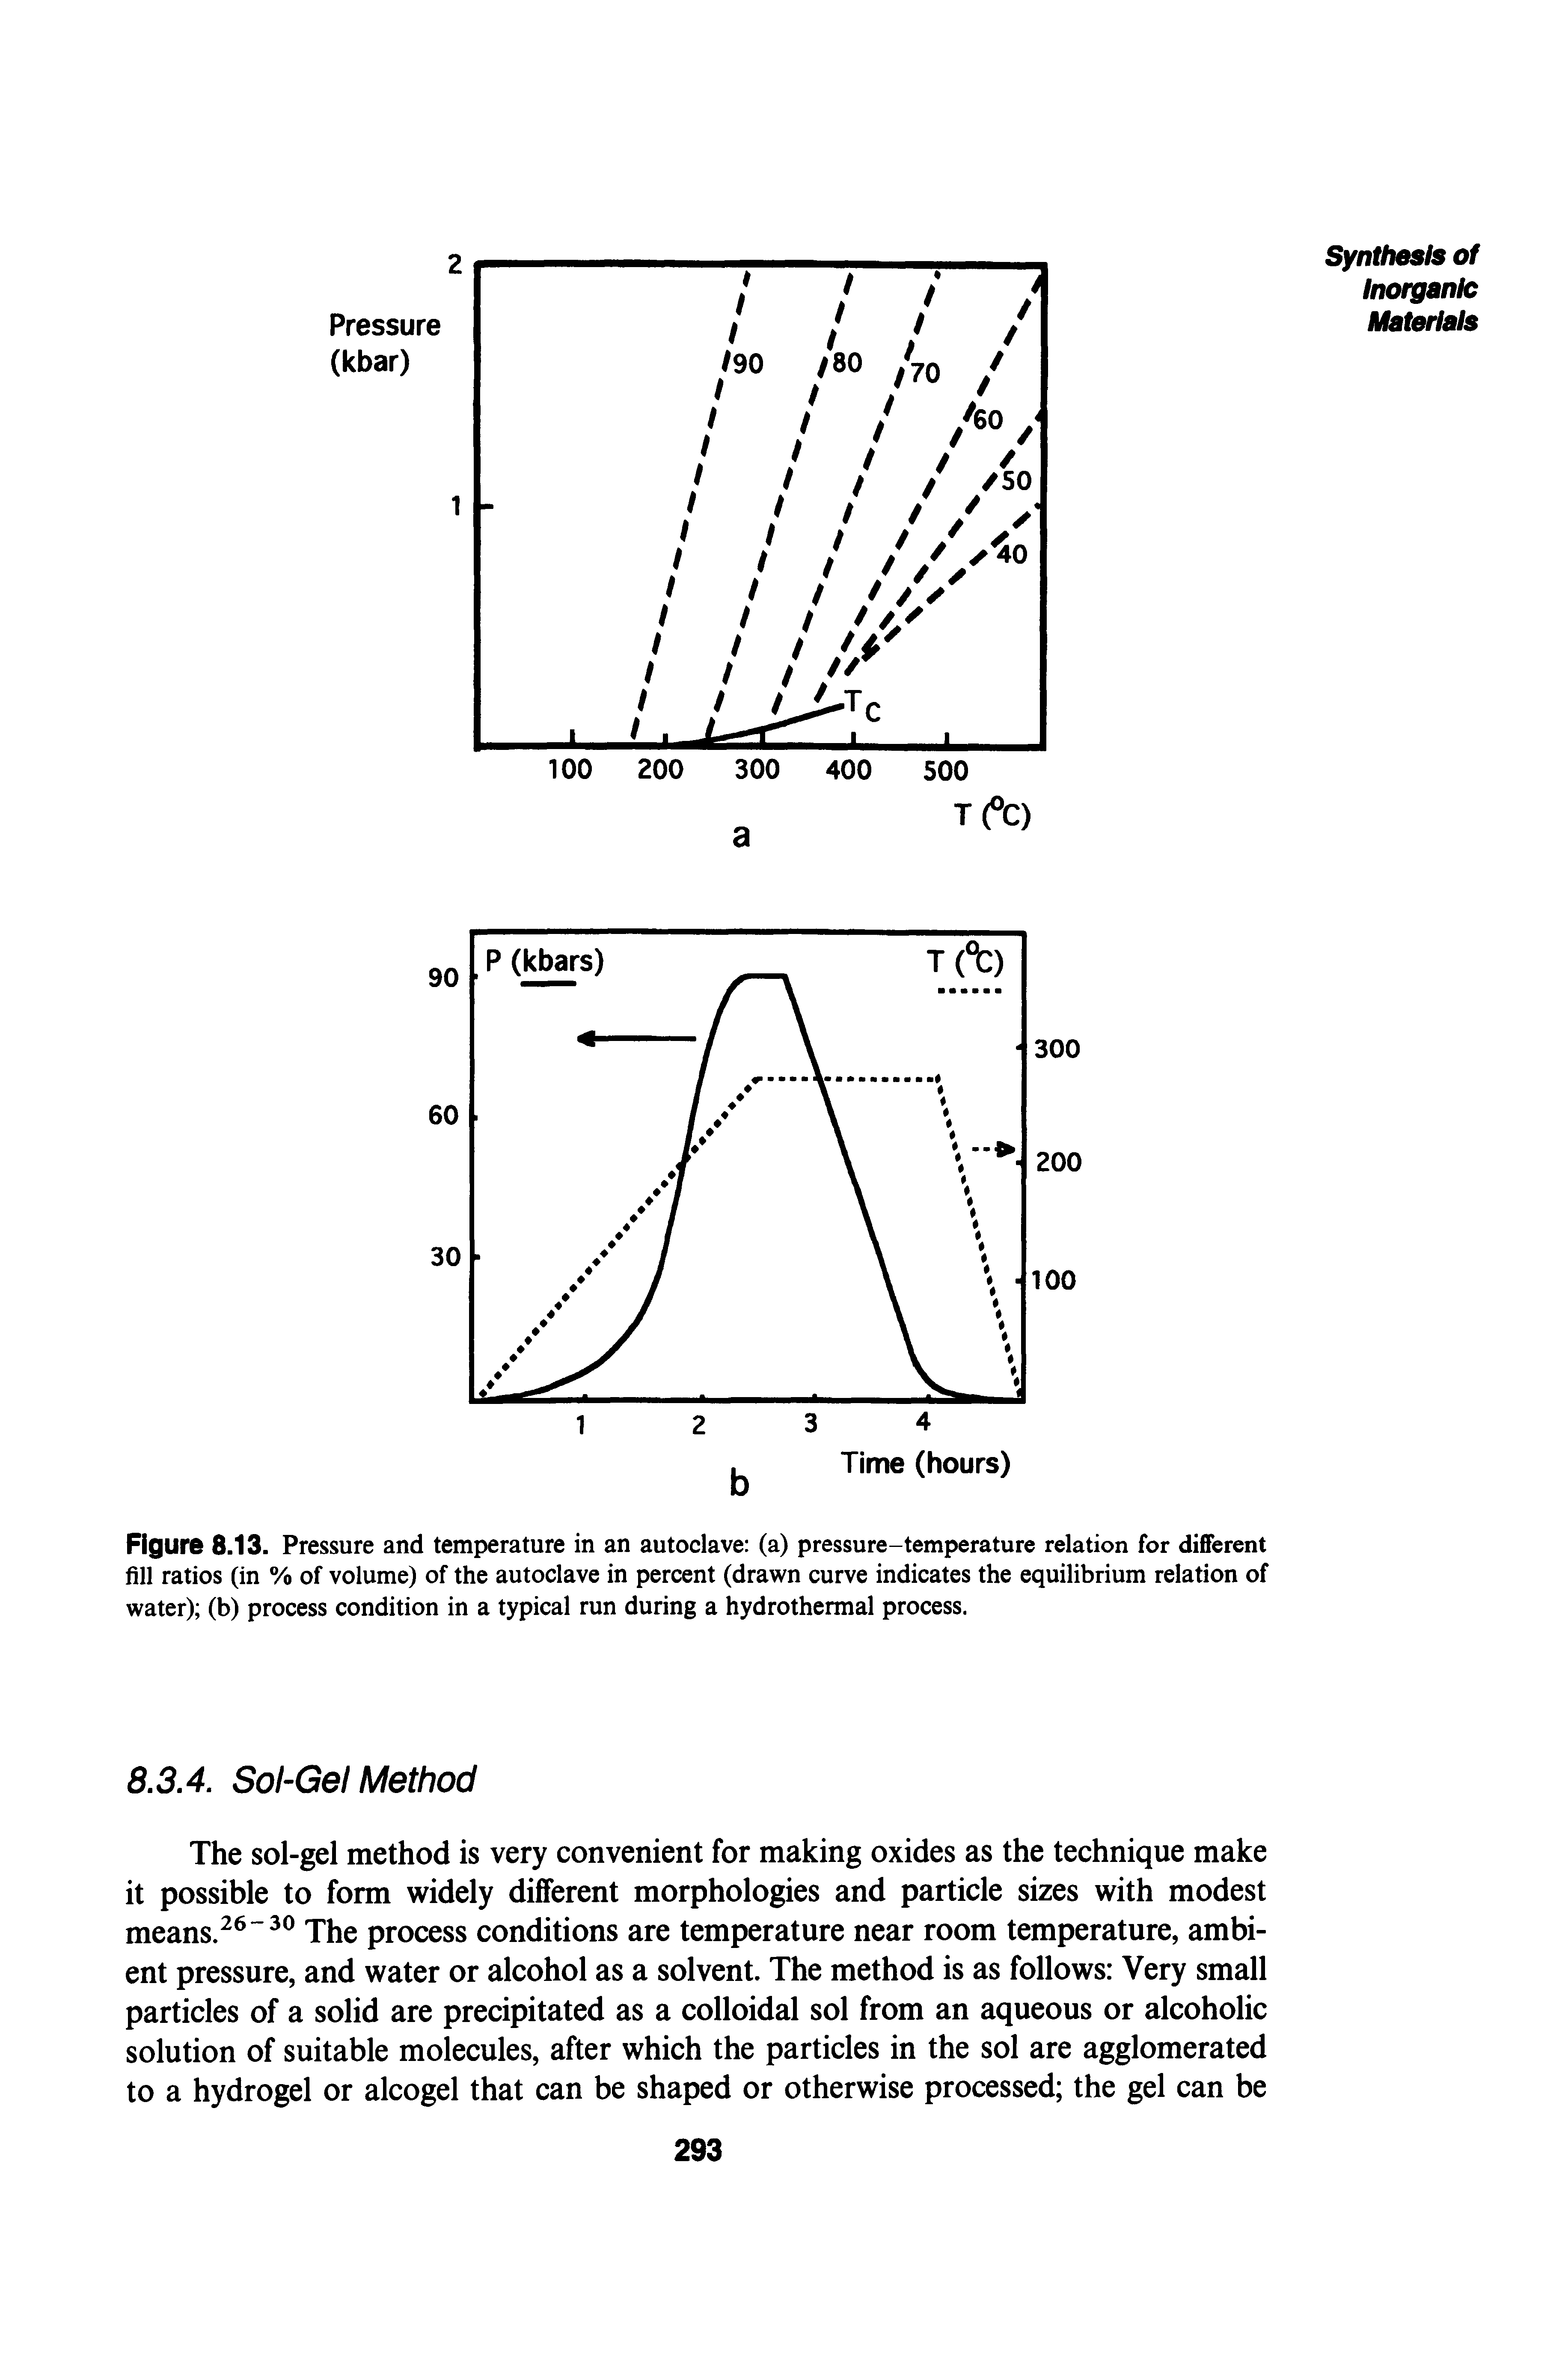 Figure 8.13. Pressure and temperature in an autoclave (a) pressure-temperature relation for different fill ratios (in % of volume) of the autoclave in percent (drawn curve indicates the equilibrium relation of water) (b) process condition in a typical run during a hydrothermal process.